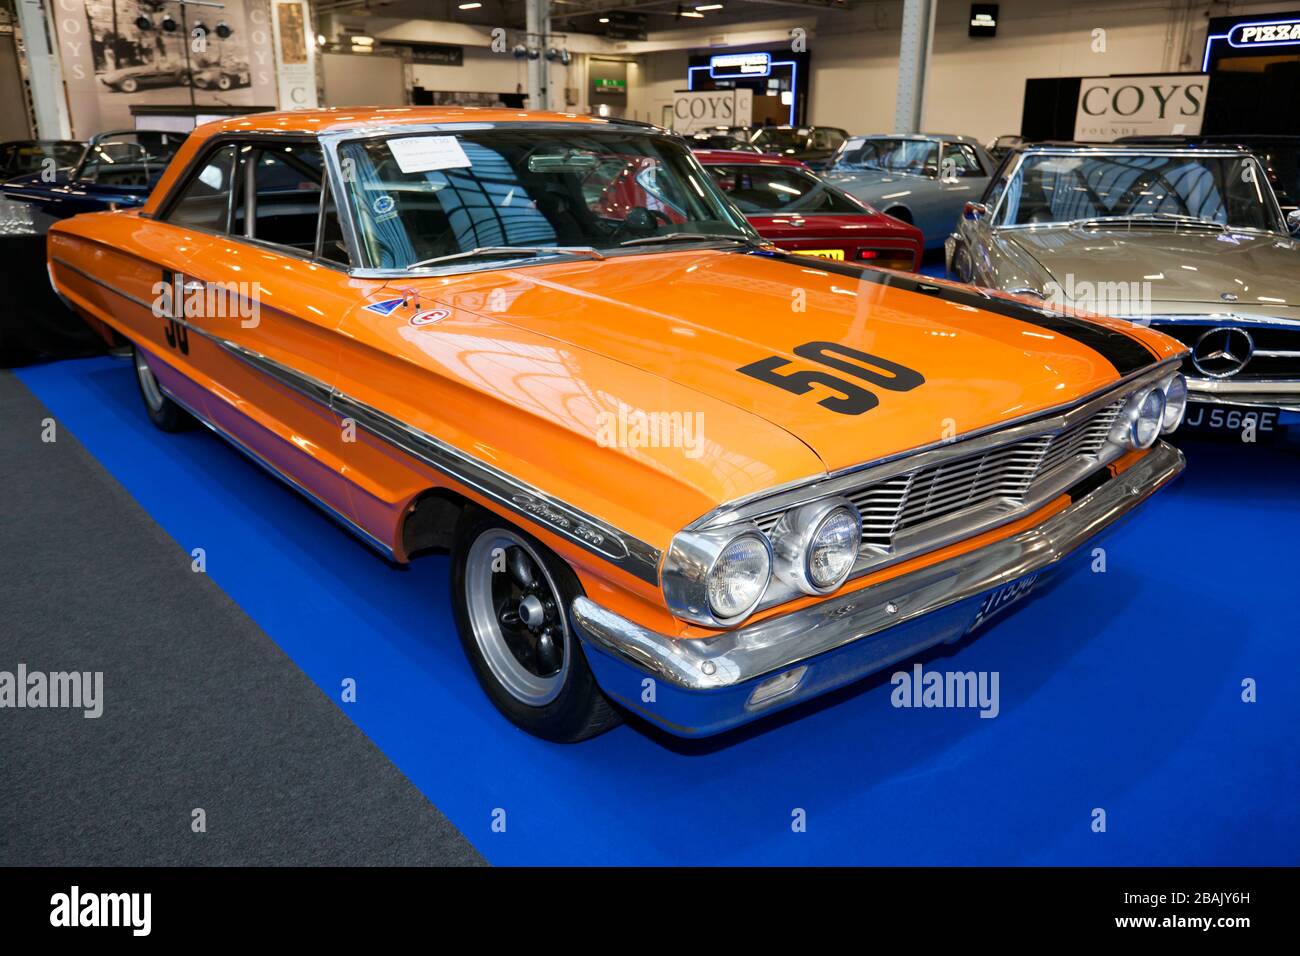 Three-quarters front view of a 1964,  Ford Galaxie 500 Race Car,  on display at the Coys Auction Area of the 2020 London Classic Car Show Stock Photo